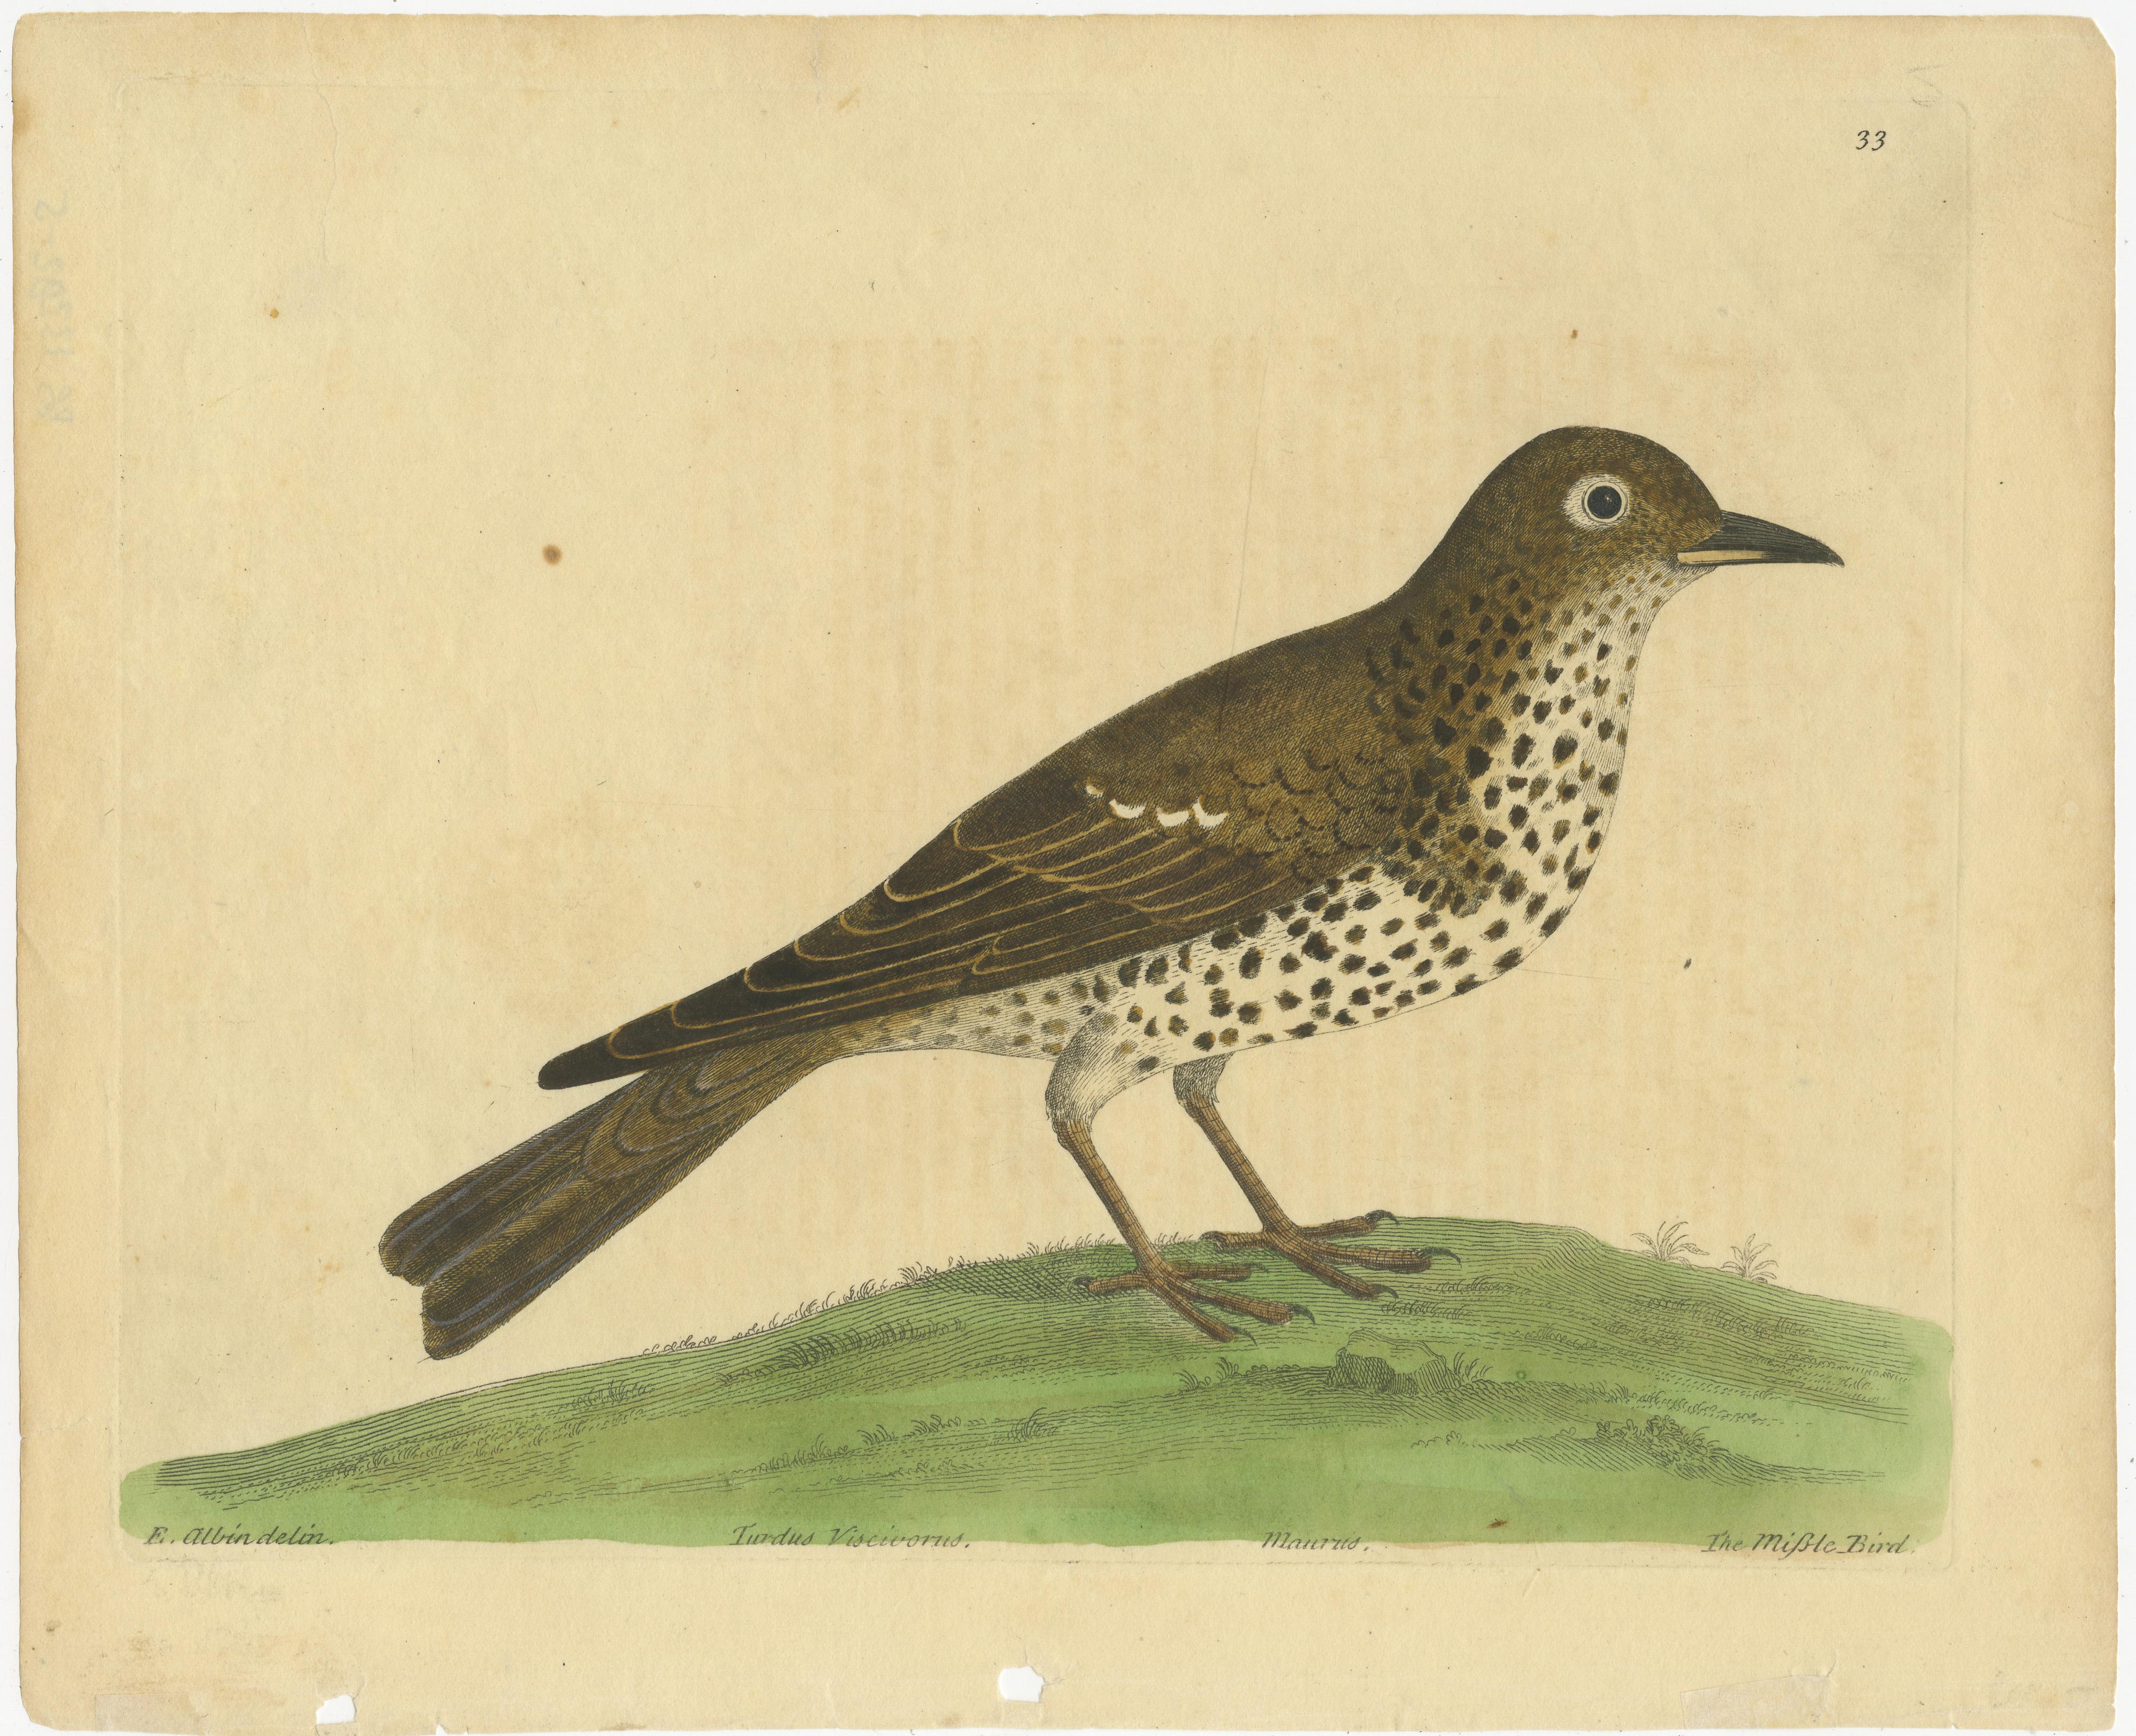 Antique bird print titled 'Turdus Viscivorus'. Original antique print of a mistle thrush. This print originates from 'A Natural History of Birds' by Eleazar Albin, published circa 1731. 

Albin was a German professional painter who settled in